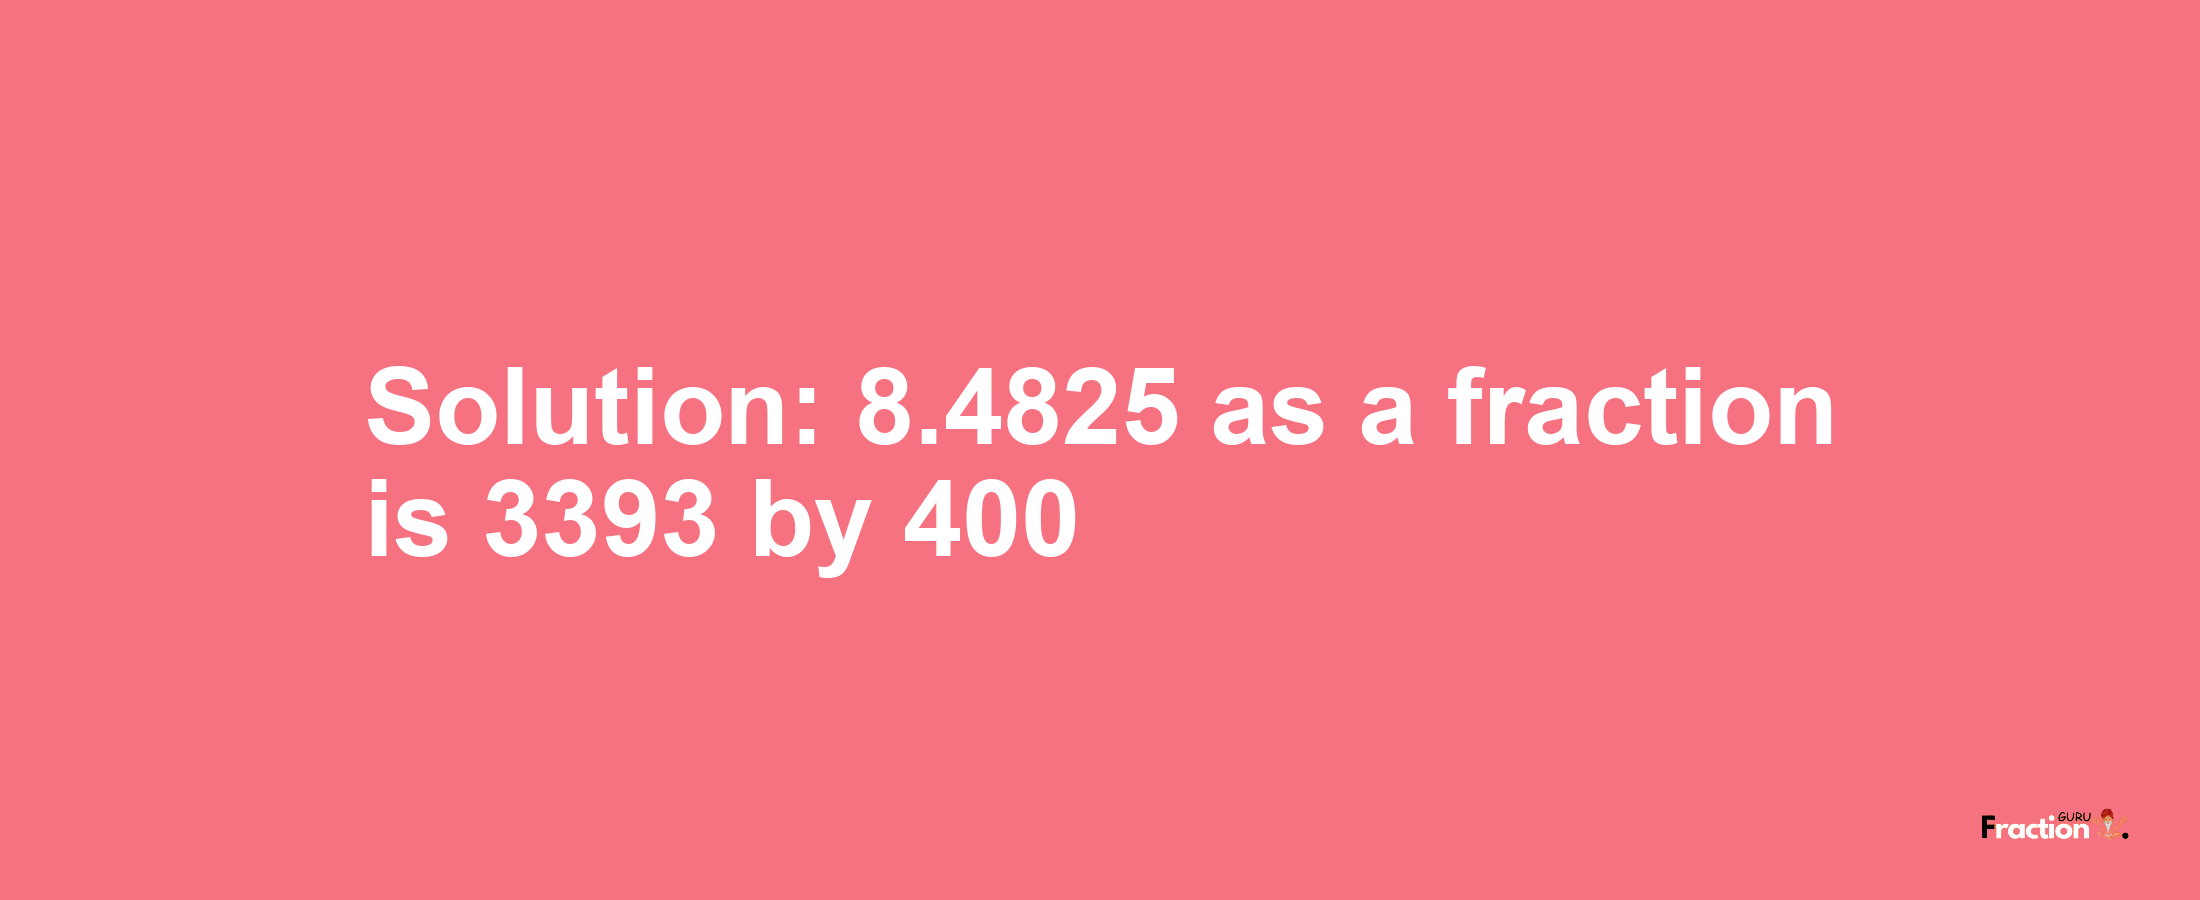 Solution:8.4825 as a fraction is 3393/400